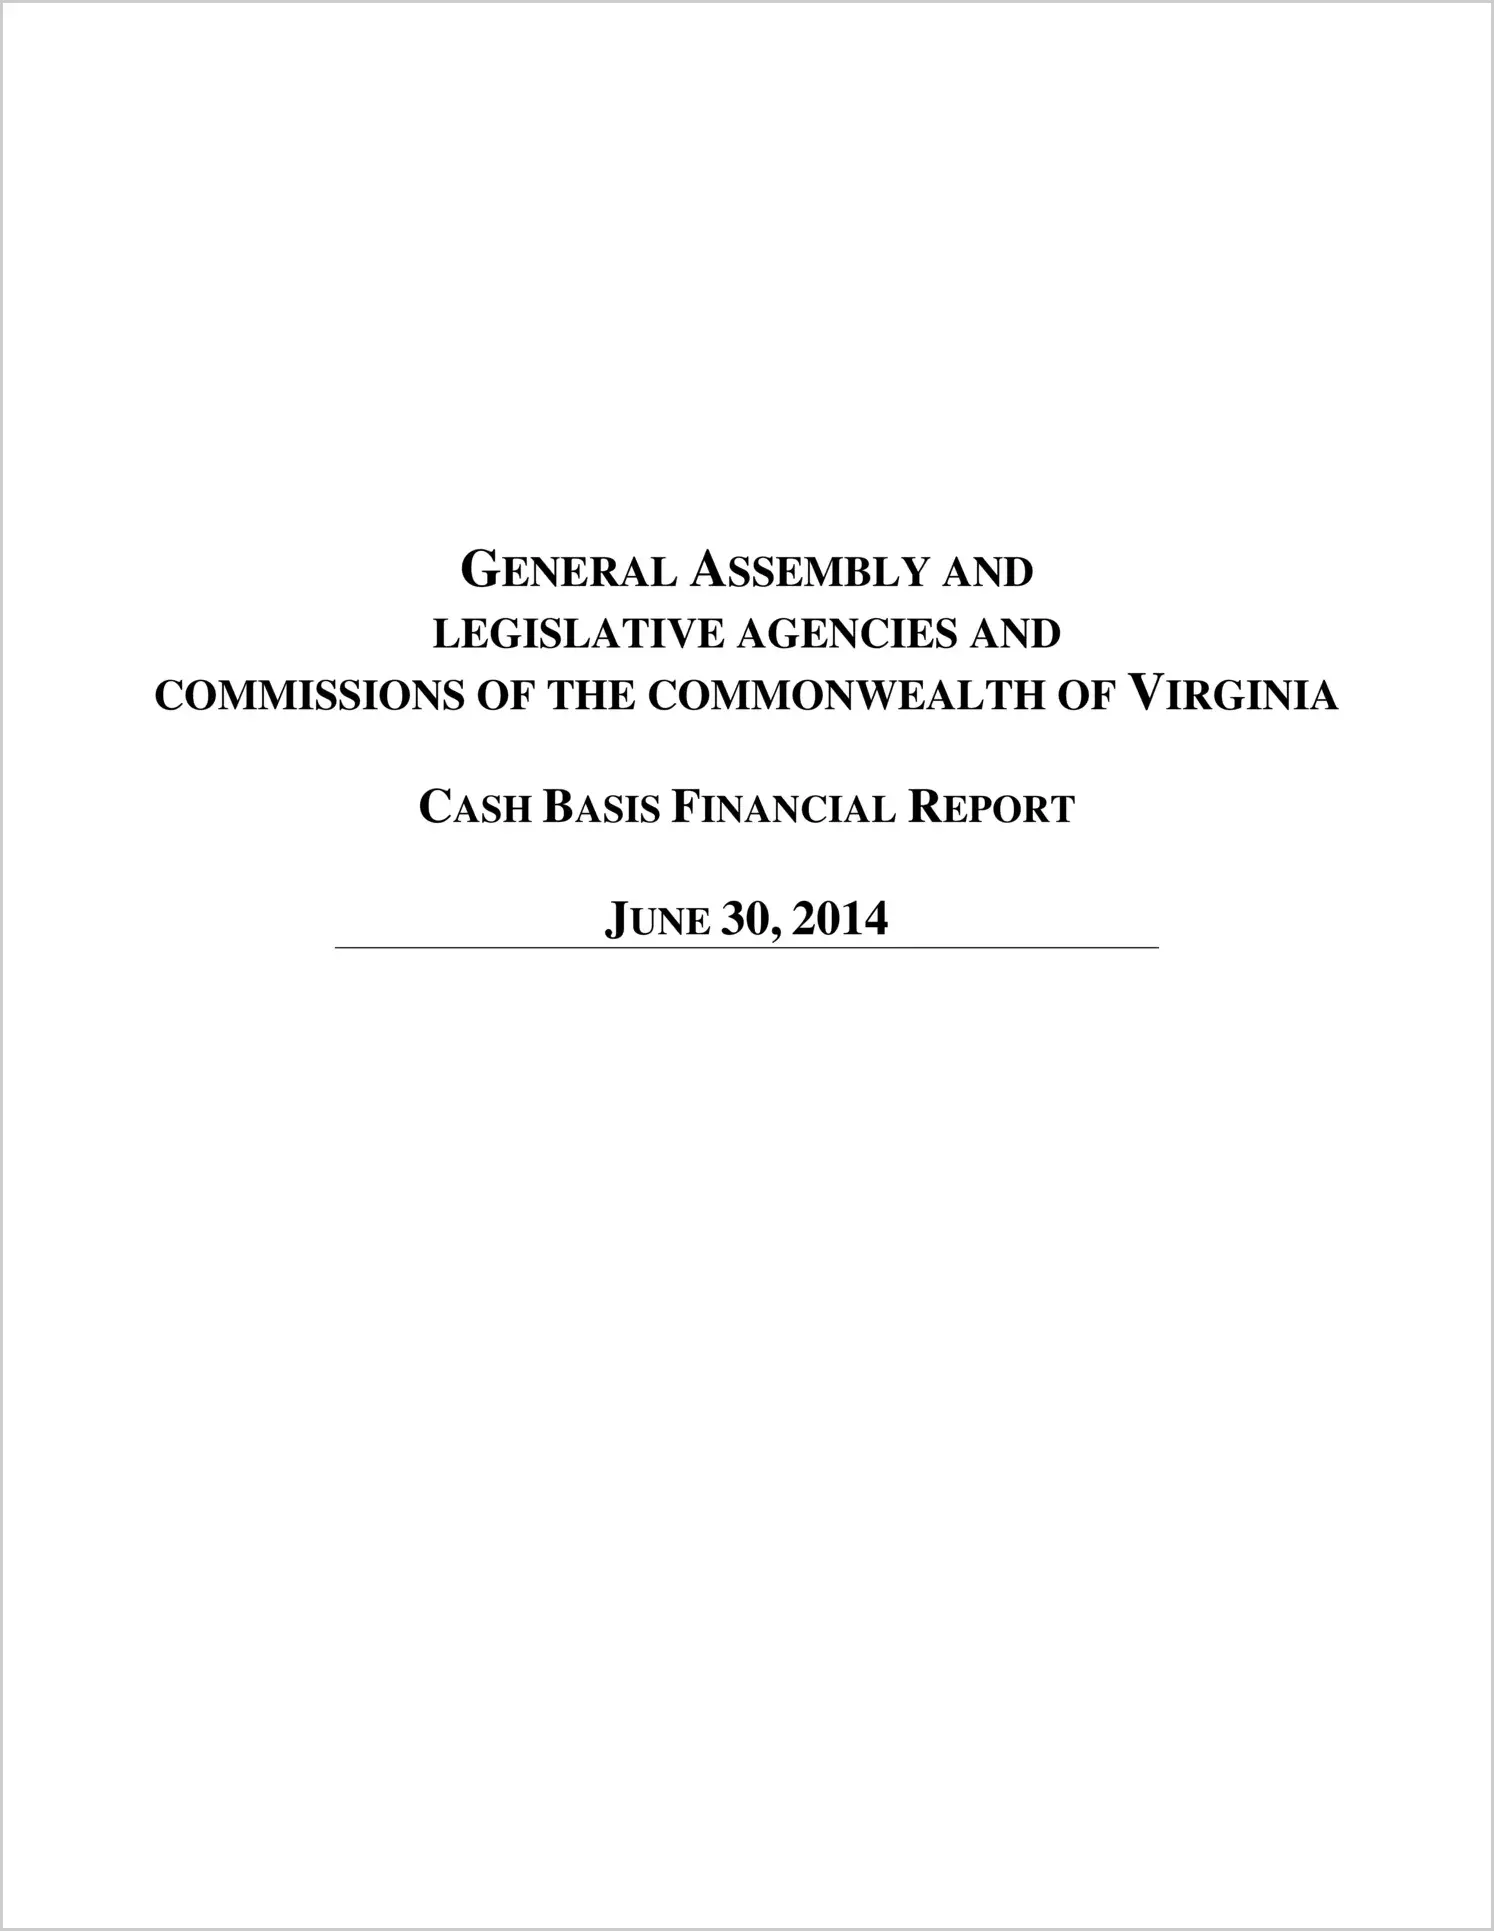 General Assembly and Legislative Agencies and Commissions of the Commonwealth of Virginia Financial Report For The Fiscal Year ended June 30, 2014